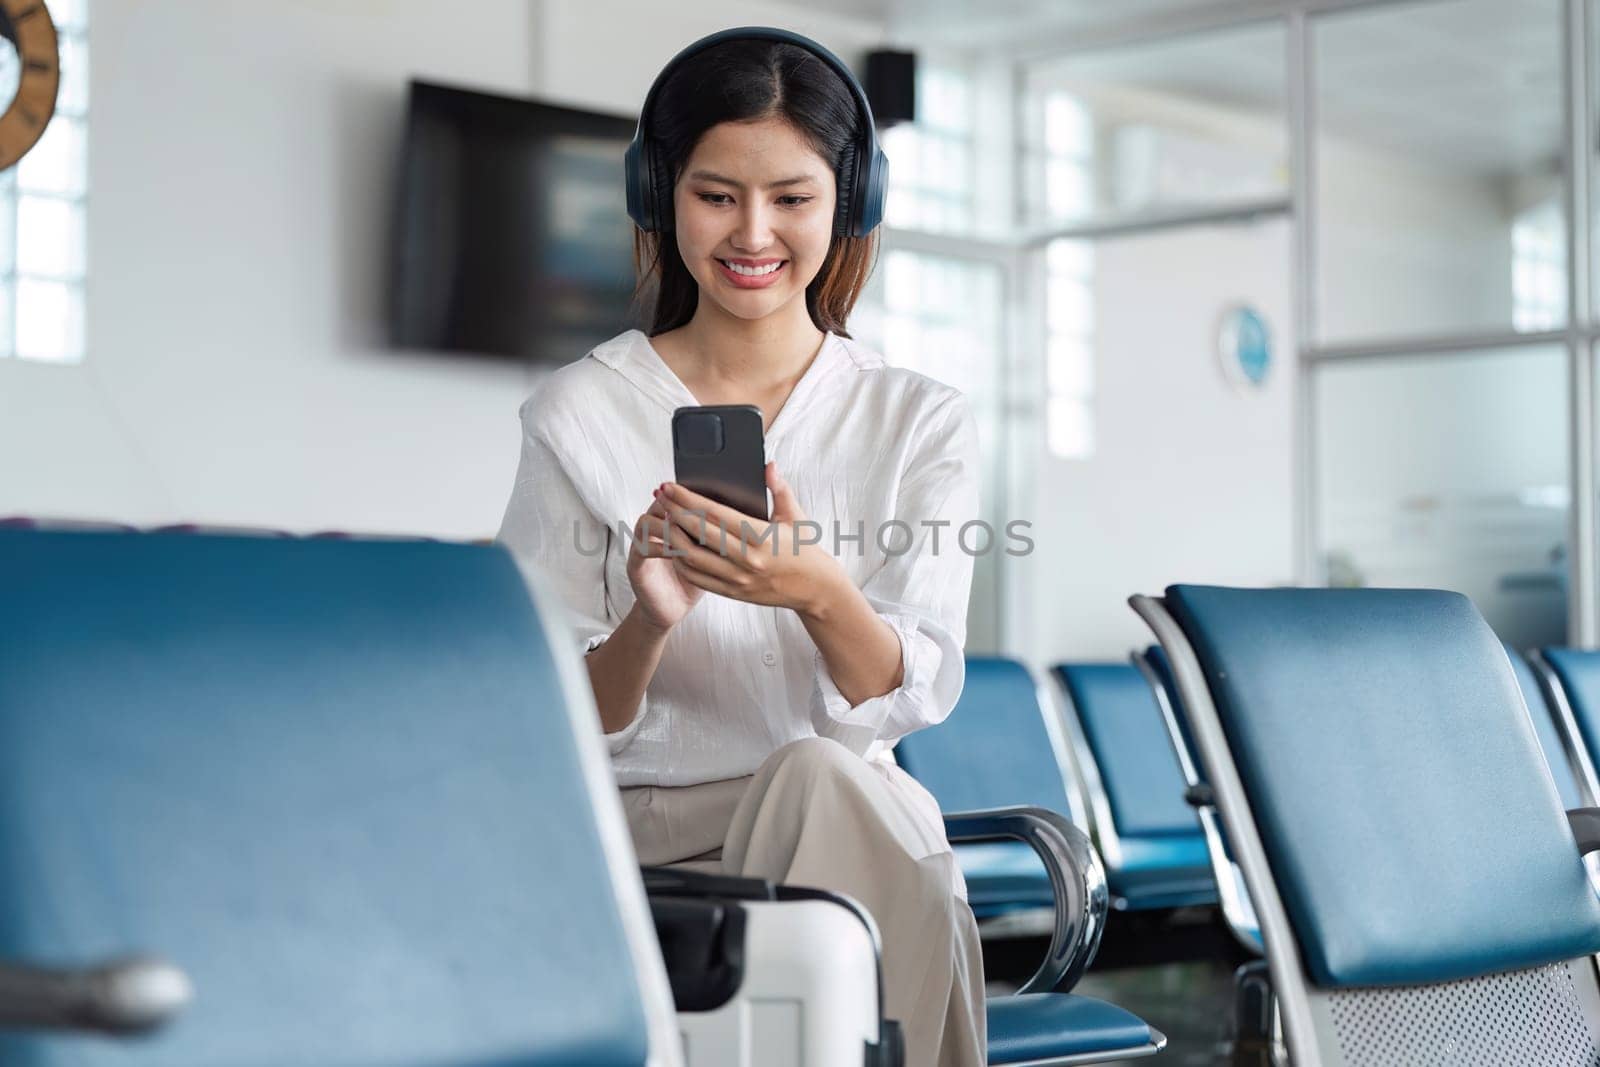 Woman listening to music on headphones in airport lounge, use smartphone and earphones while waiting for her flight.